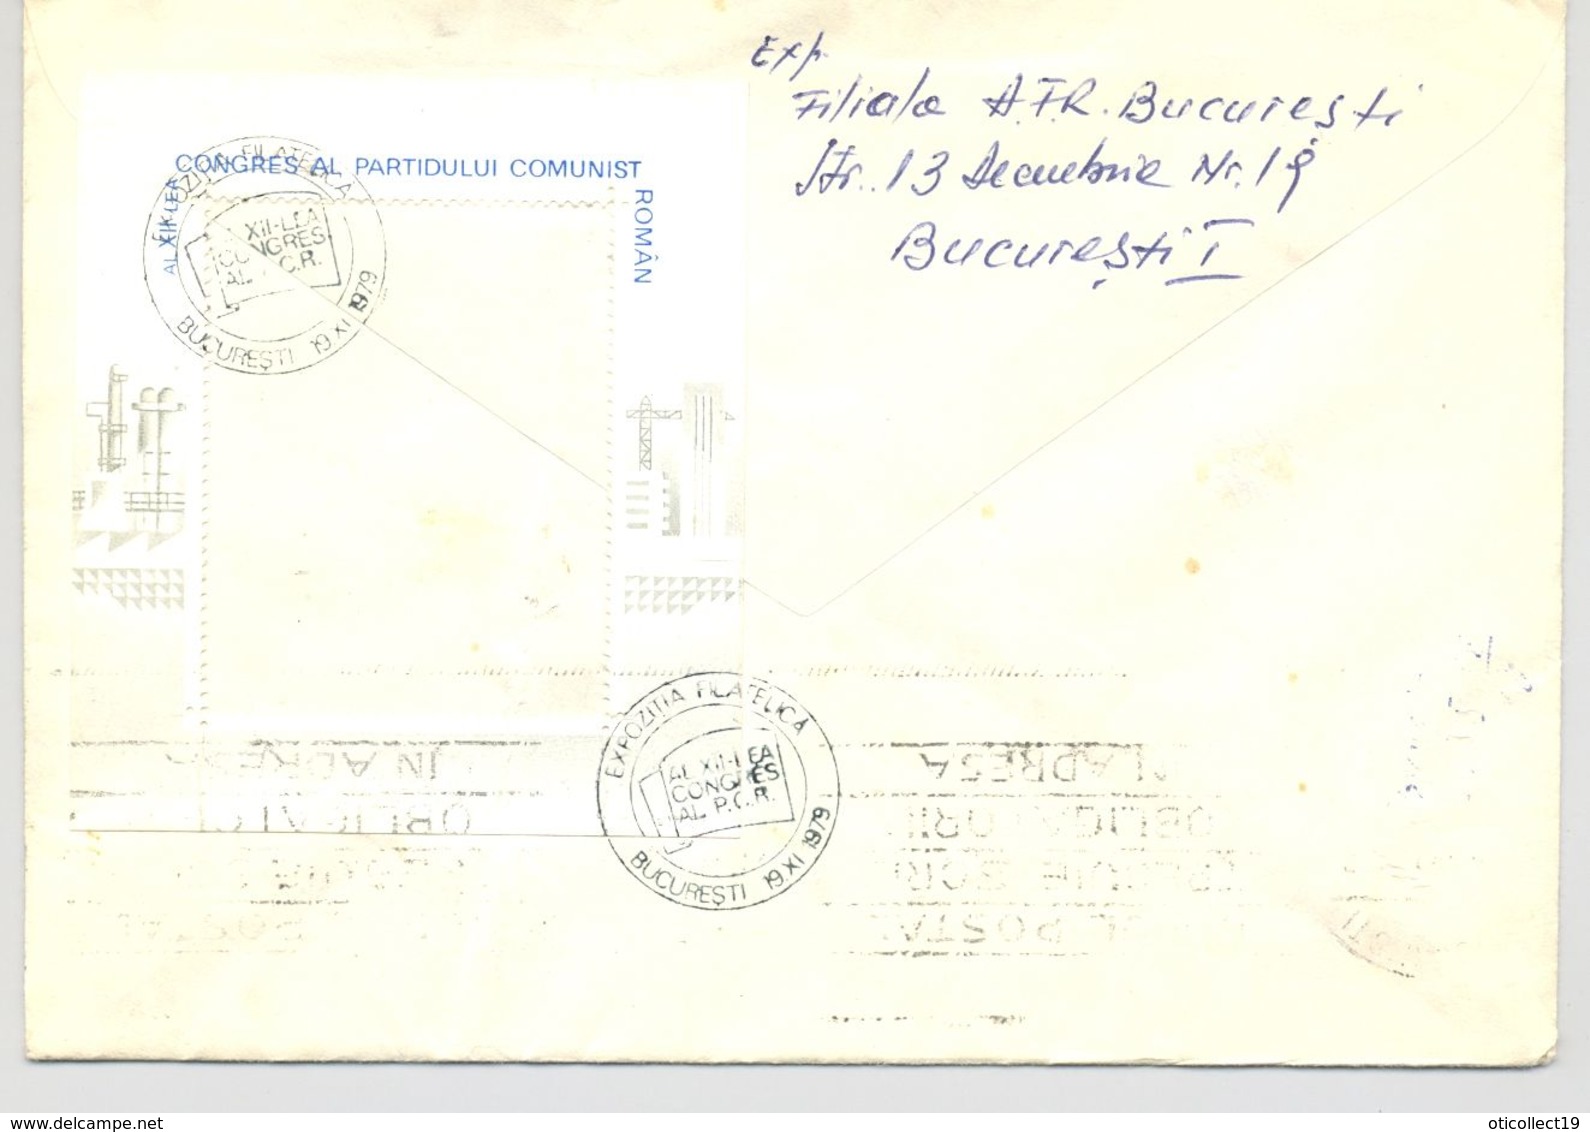 ROMANIAN COMMUNIST CONGRESS, REGISTERED SPECIAL COVER, 1979, ROMANIA - Covers & Documents